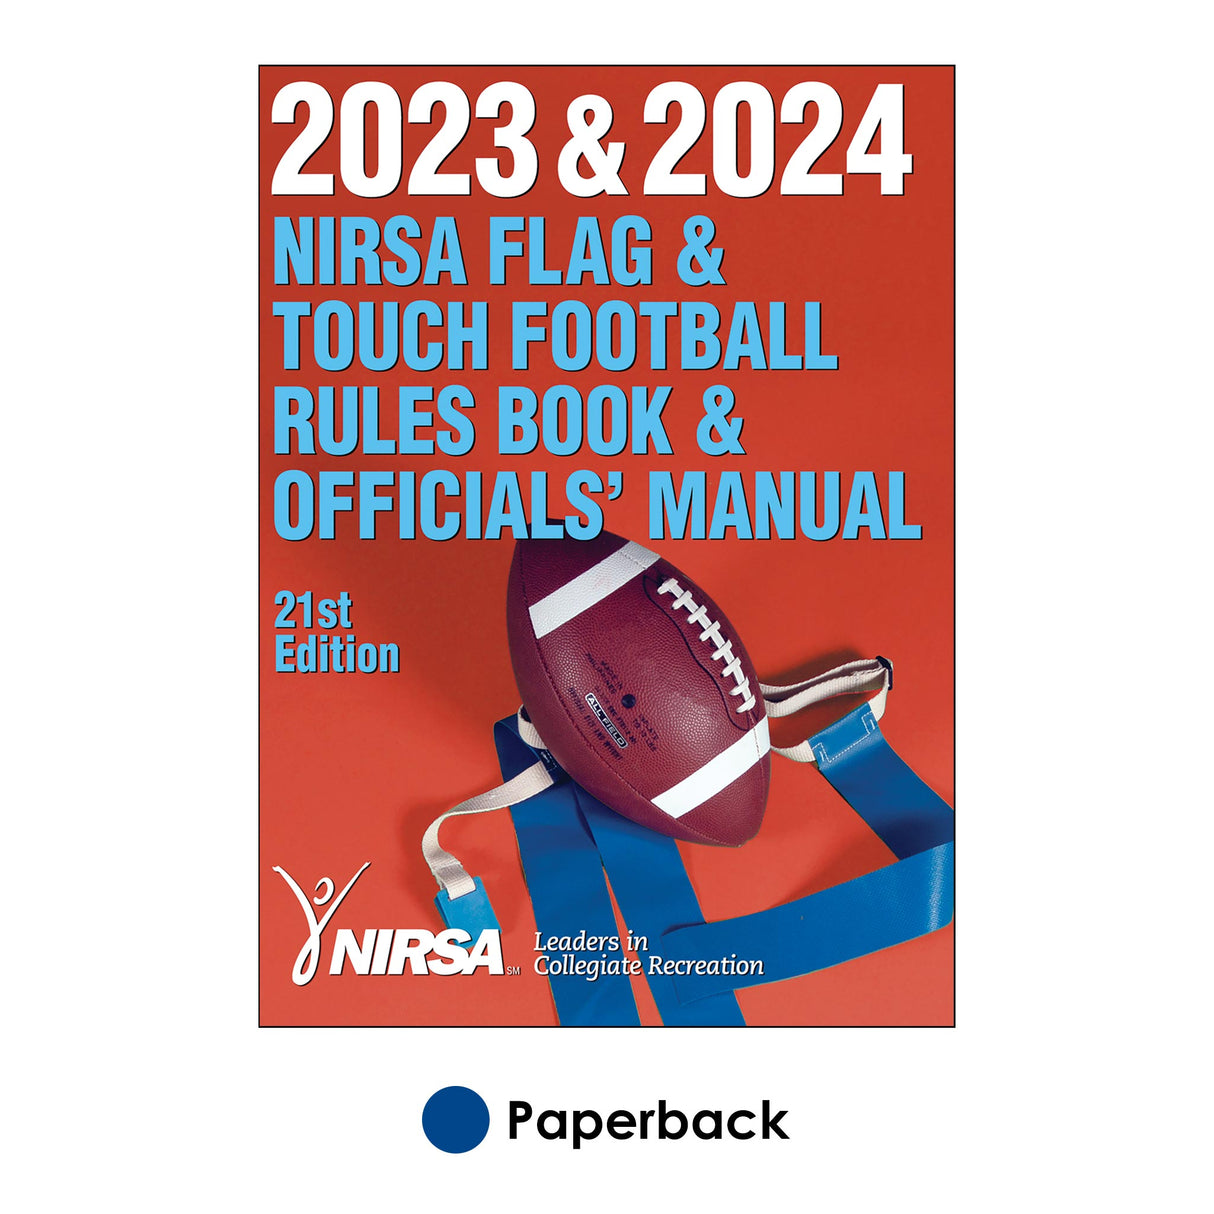 2023 & 2024 NIRSA Flag & Touch Football Rules Book & Officials' Manual-21st Edition